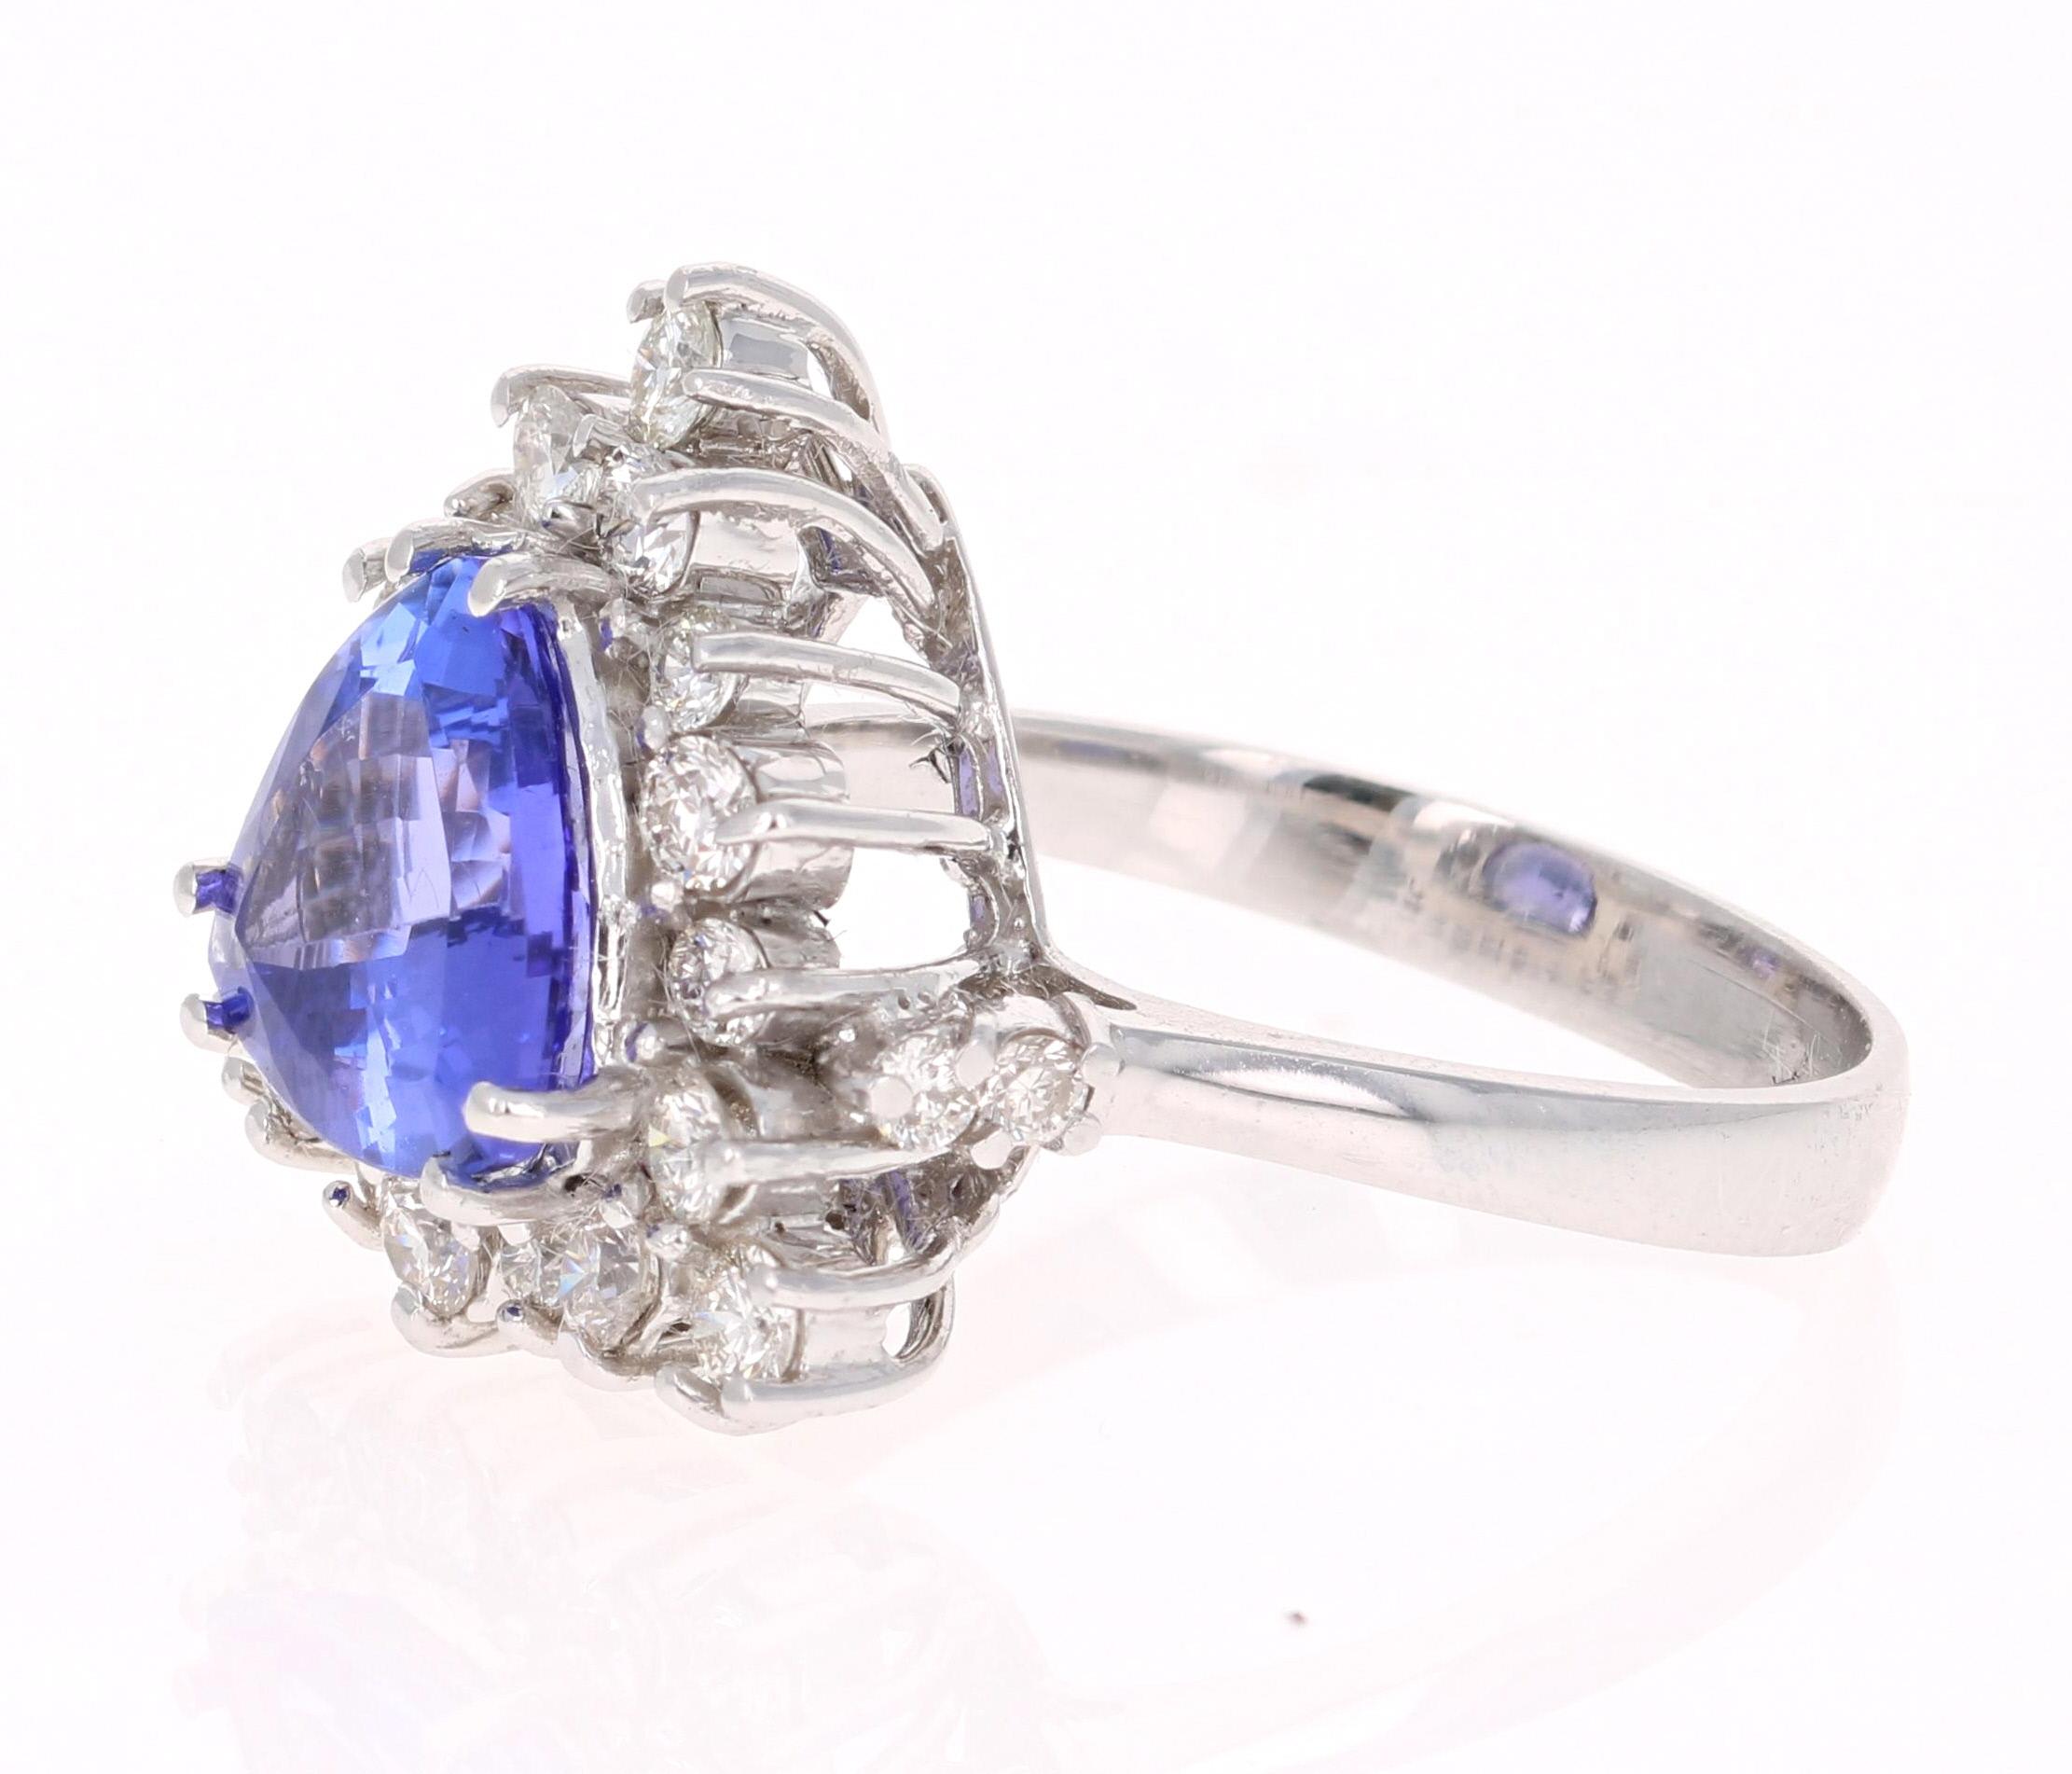 This ring has a natural Trillion Cut Tanzanite that weighs 2.60 Carats. It is surrounded by 22 Round Cut Diamonds that weigh 0.85 Carats. The total carat weight of the ring is 3.45 carats.
The Tanzanite measures at 9.5 mm x 9 mm. 
Elegantly set in